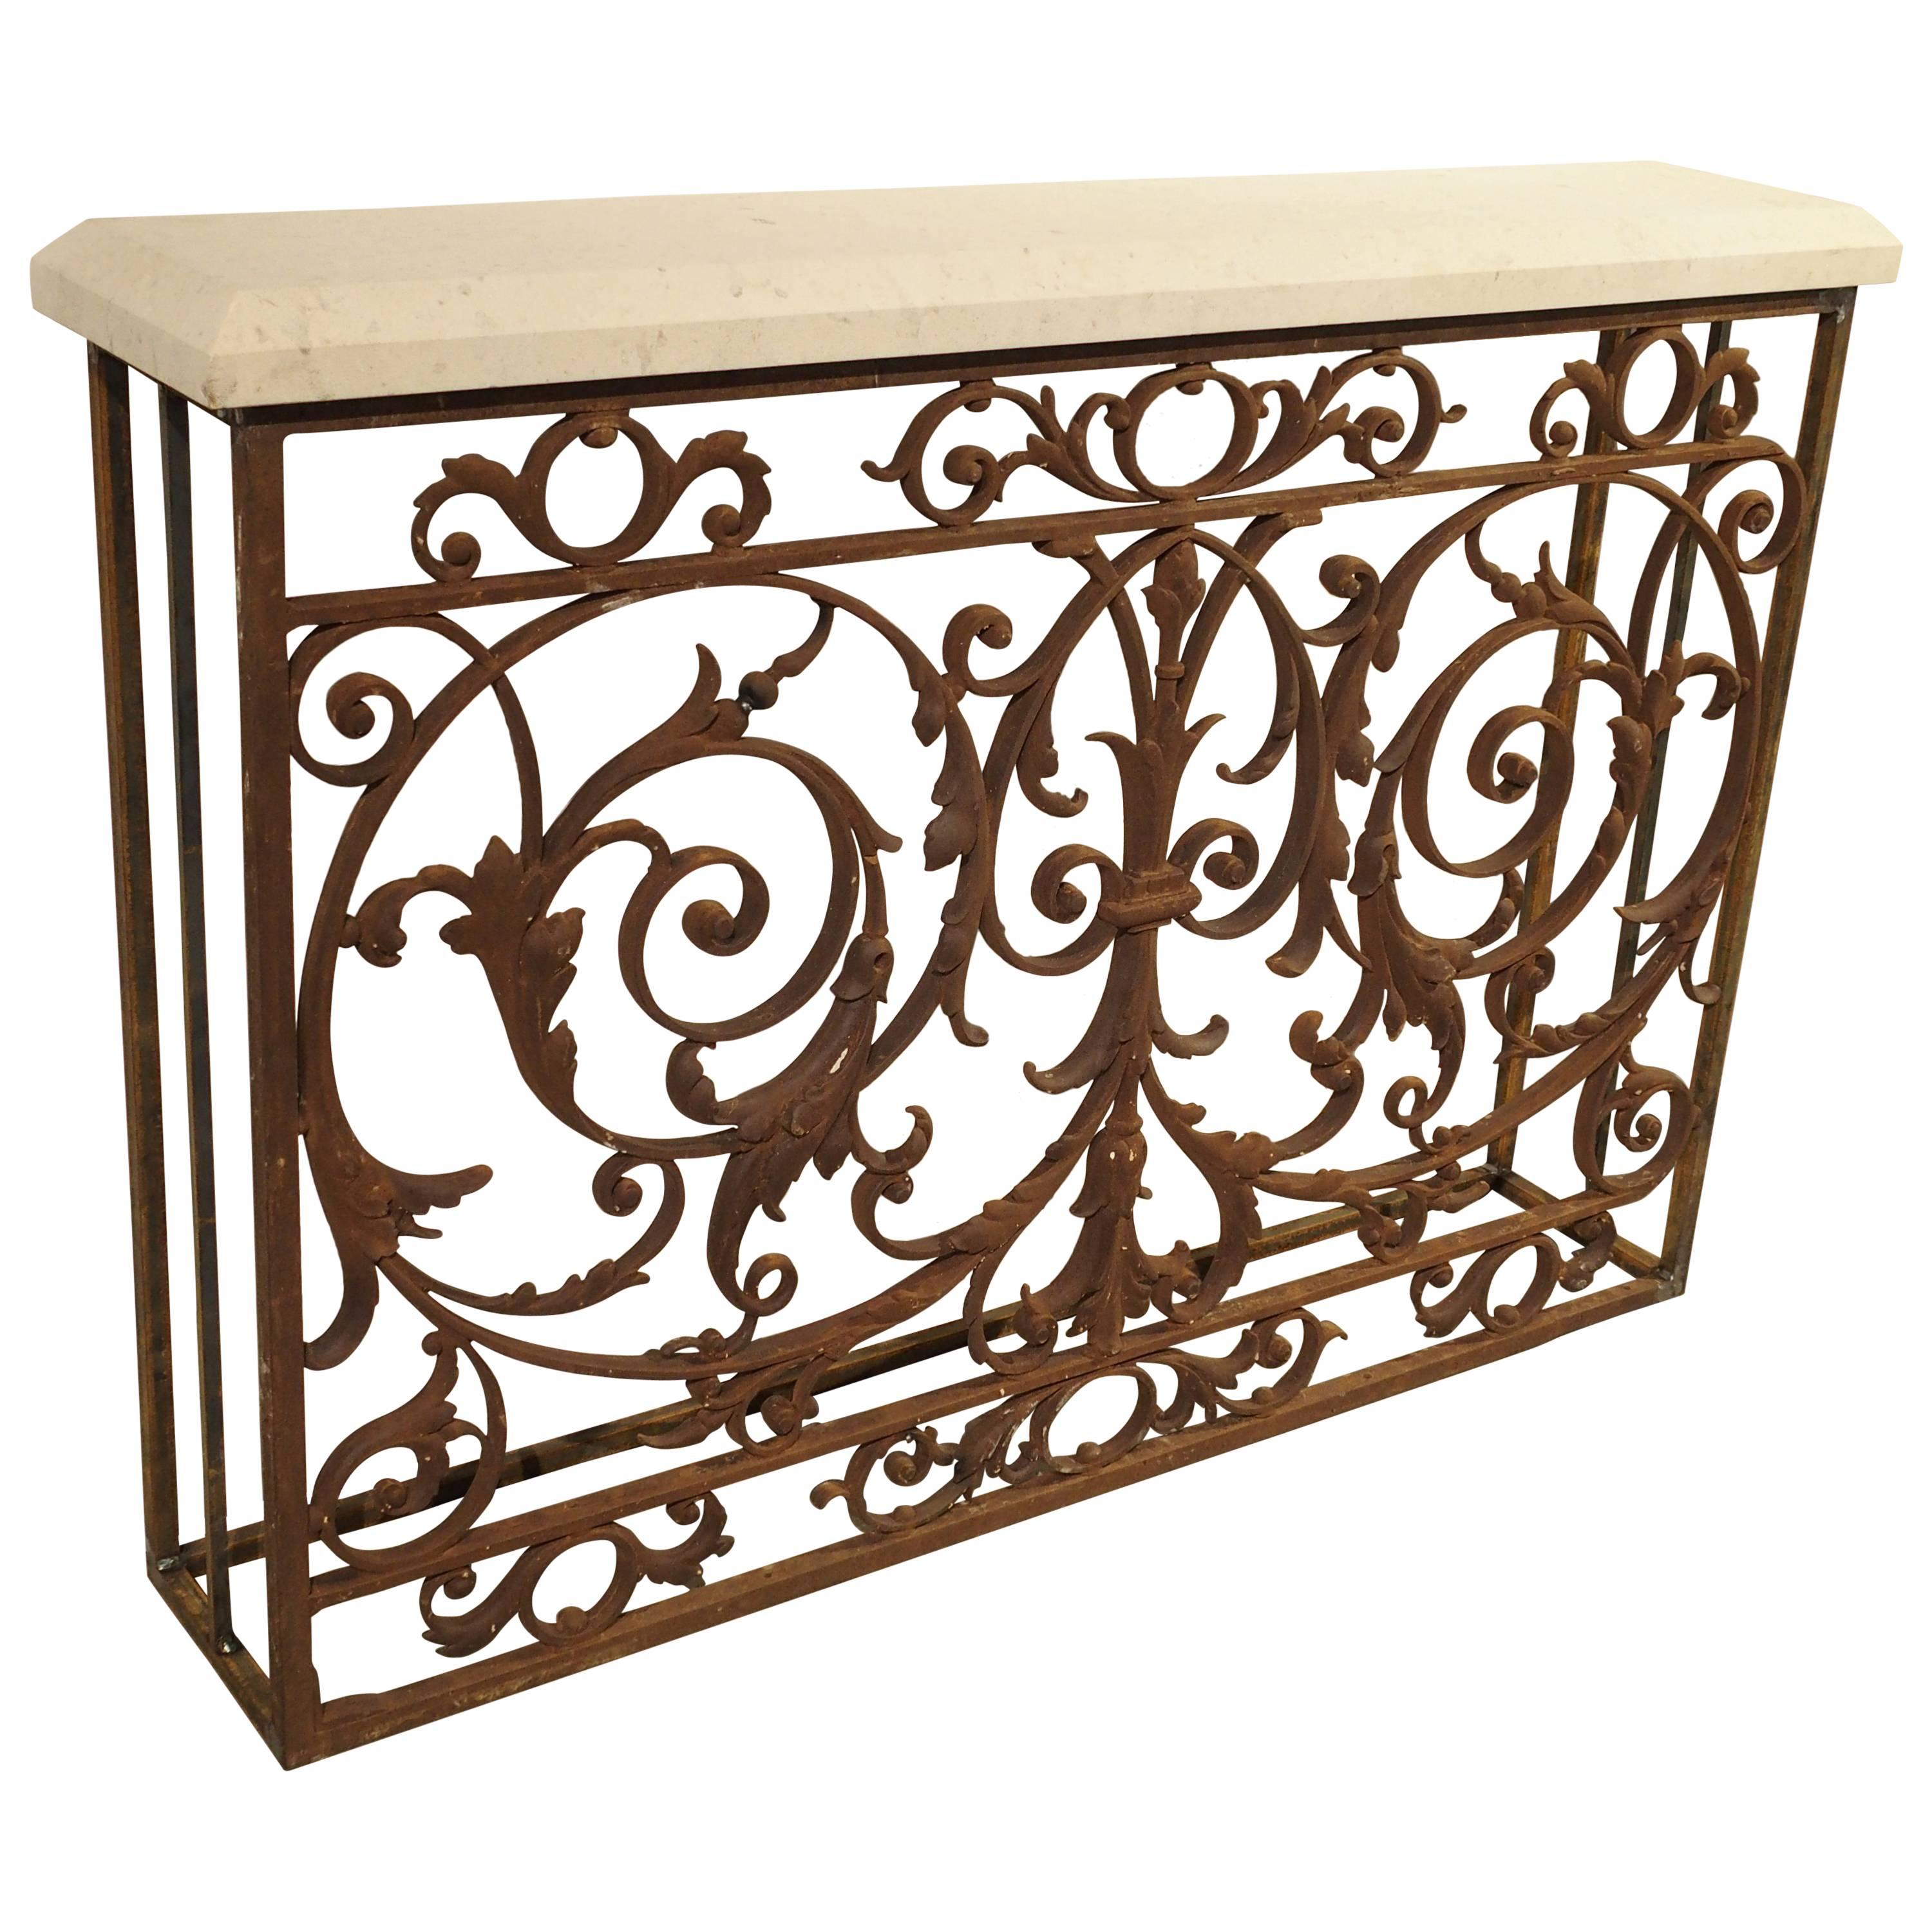 Antique Balcony Gate Console from France, 19th Century